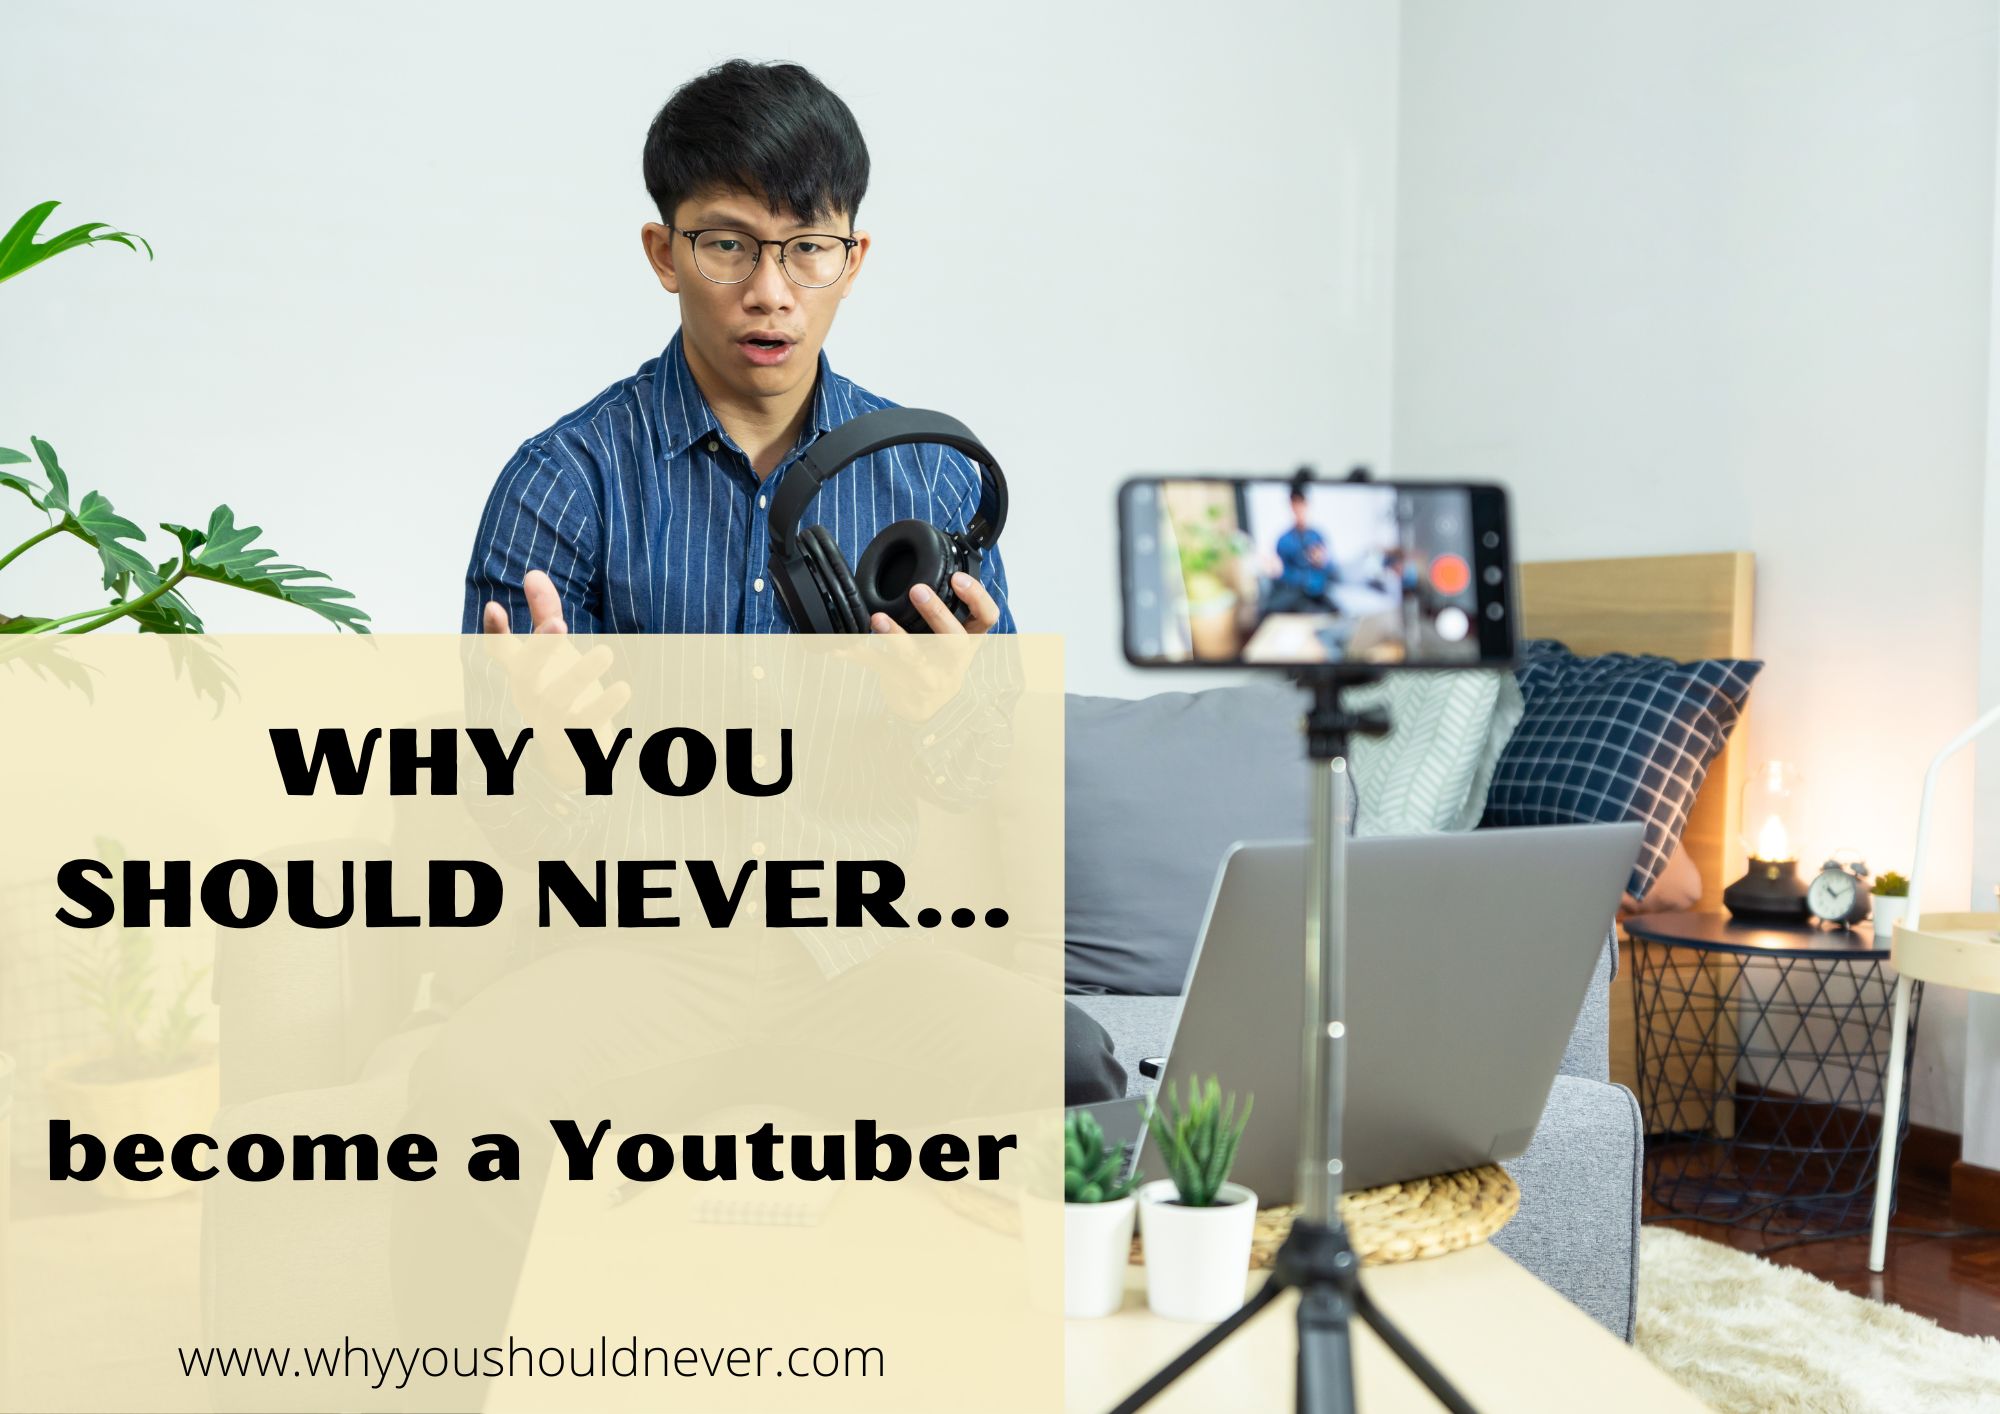 Why You Should Never Become A YouTuber